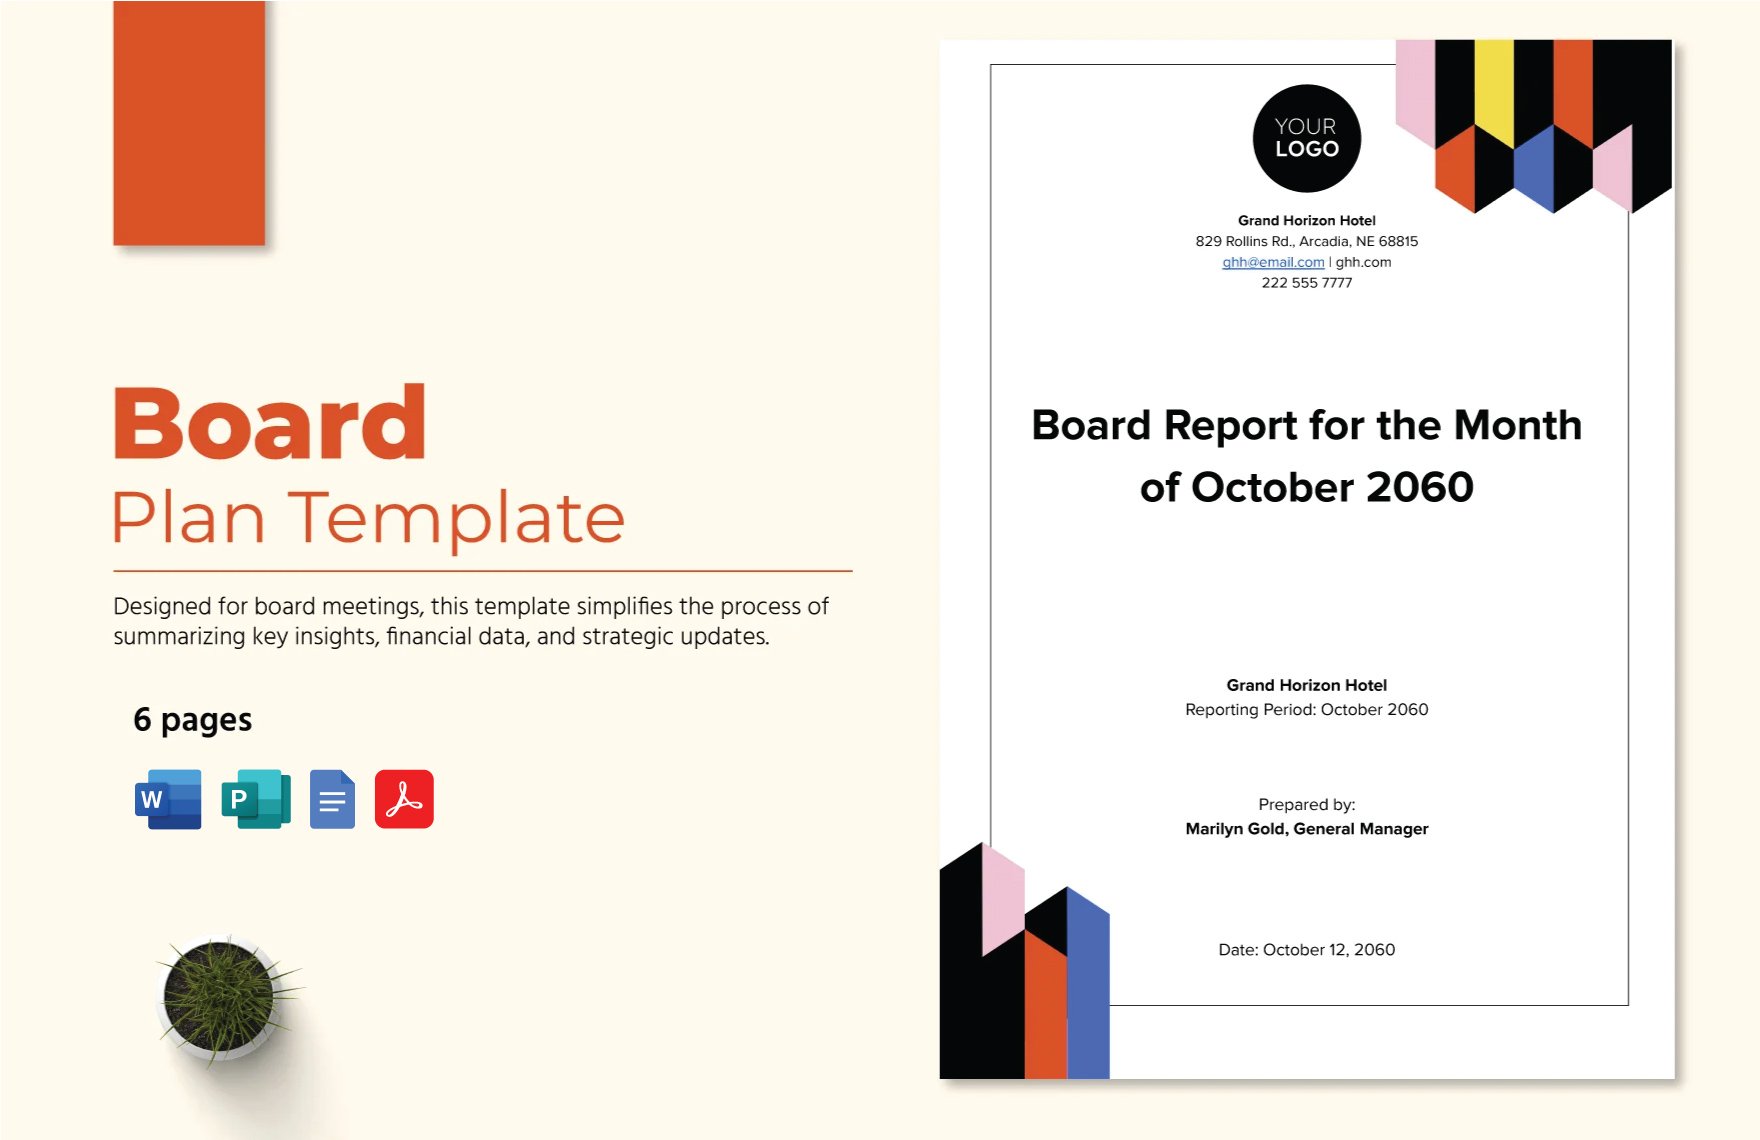 Board Report Template in Word, Google Docs, PDF, Publisher